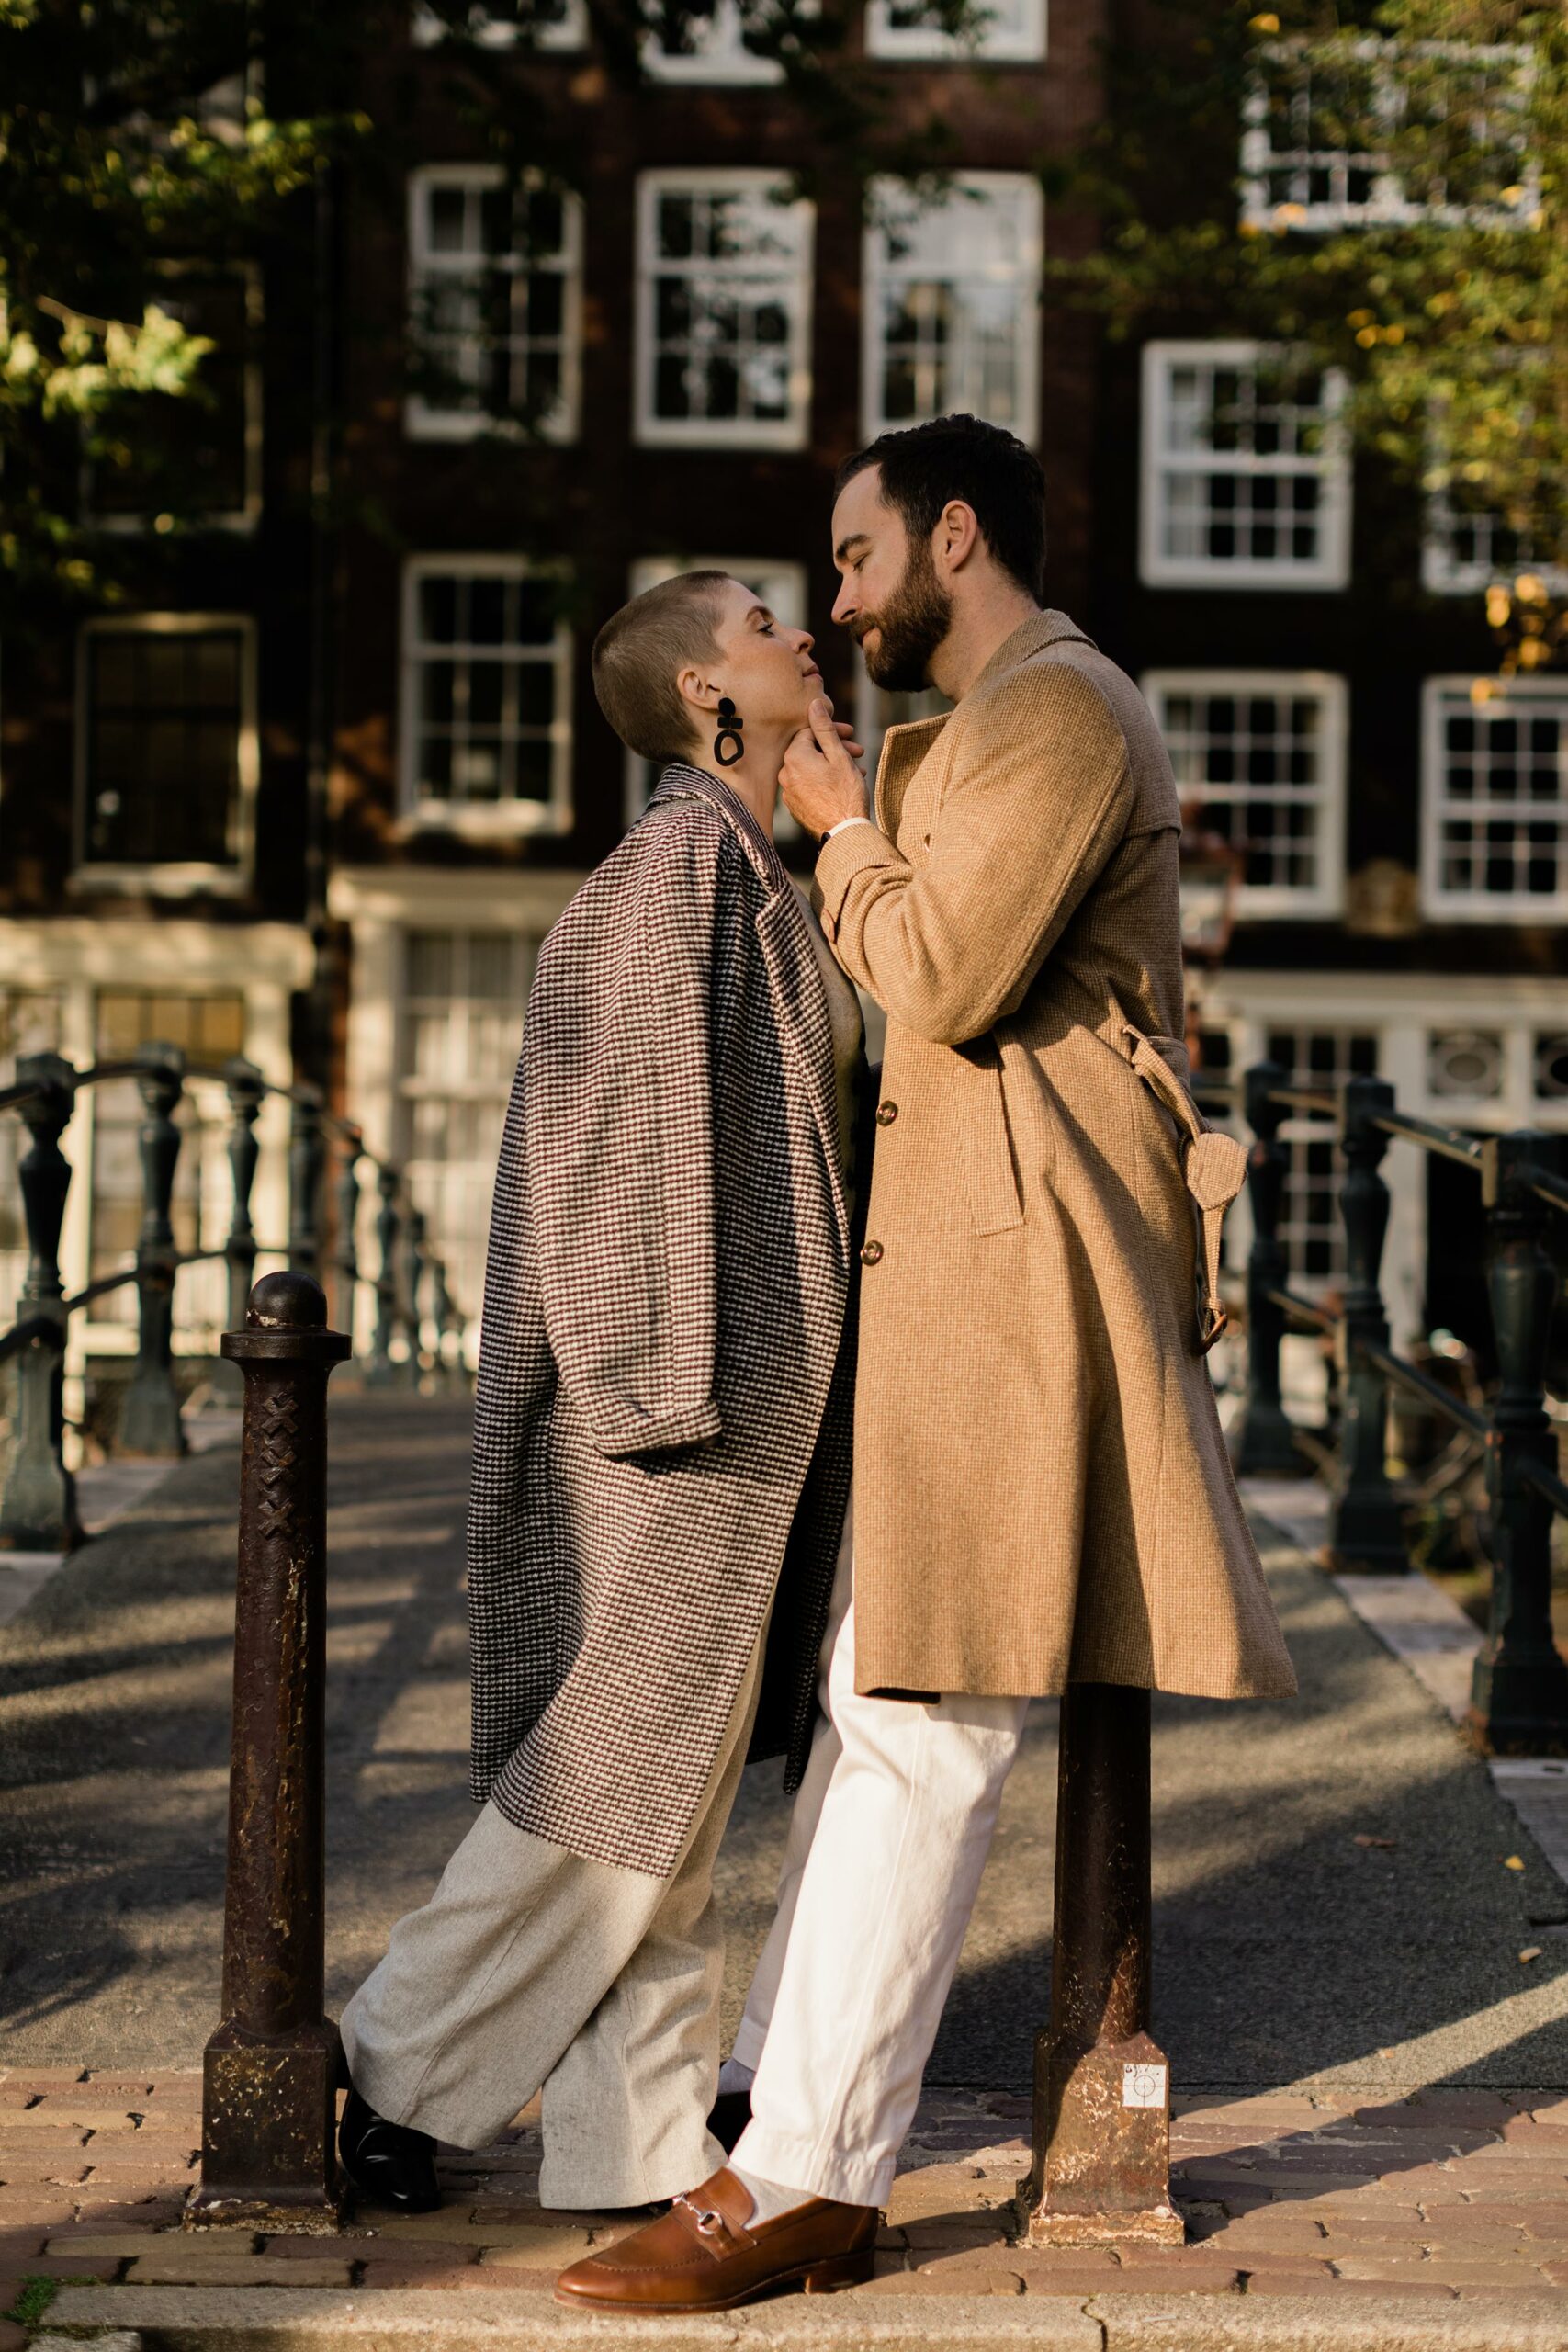 alt="beautiful couple have a tender moment in Amsterdam during golden hour"